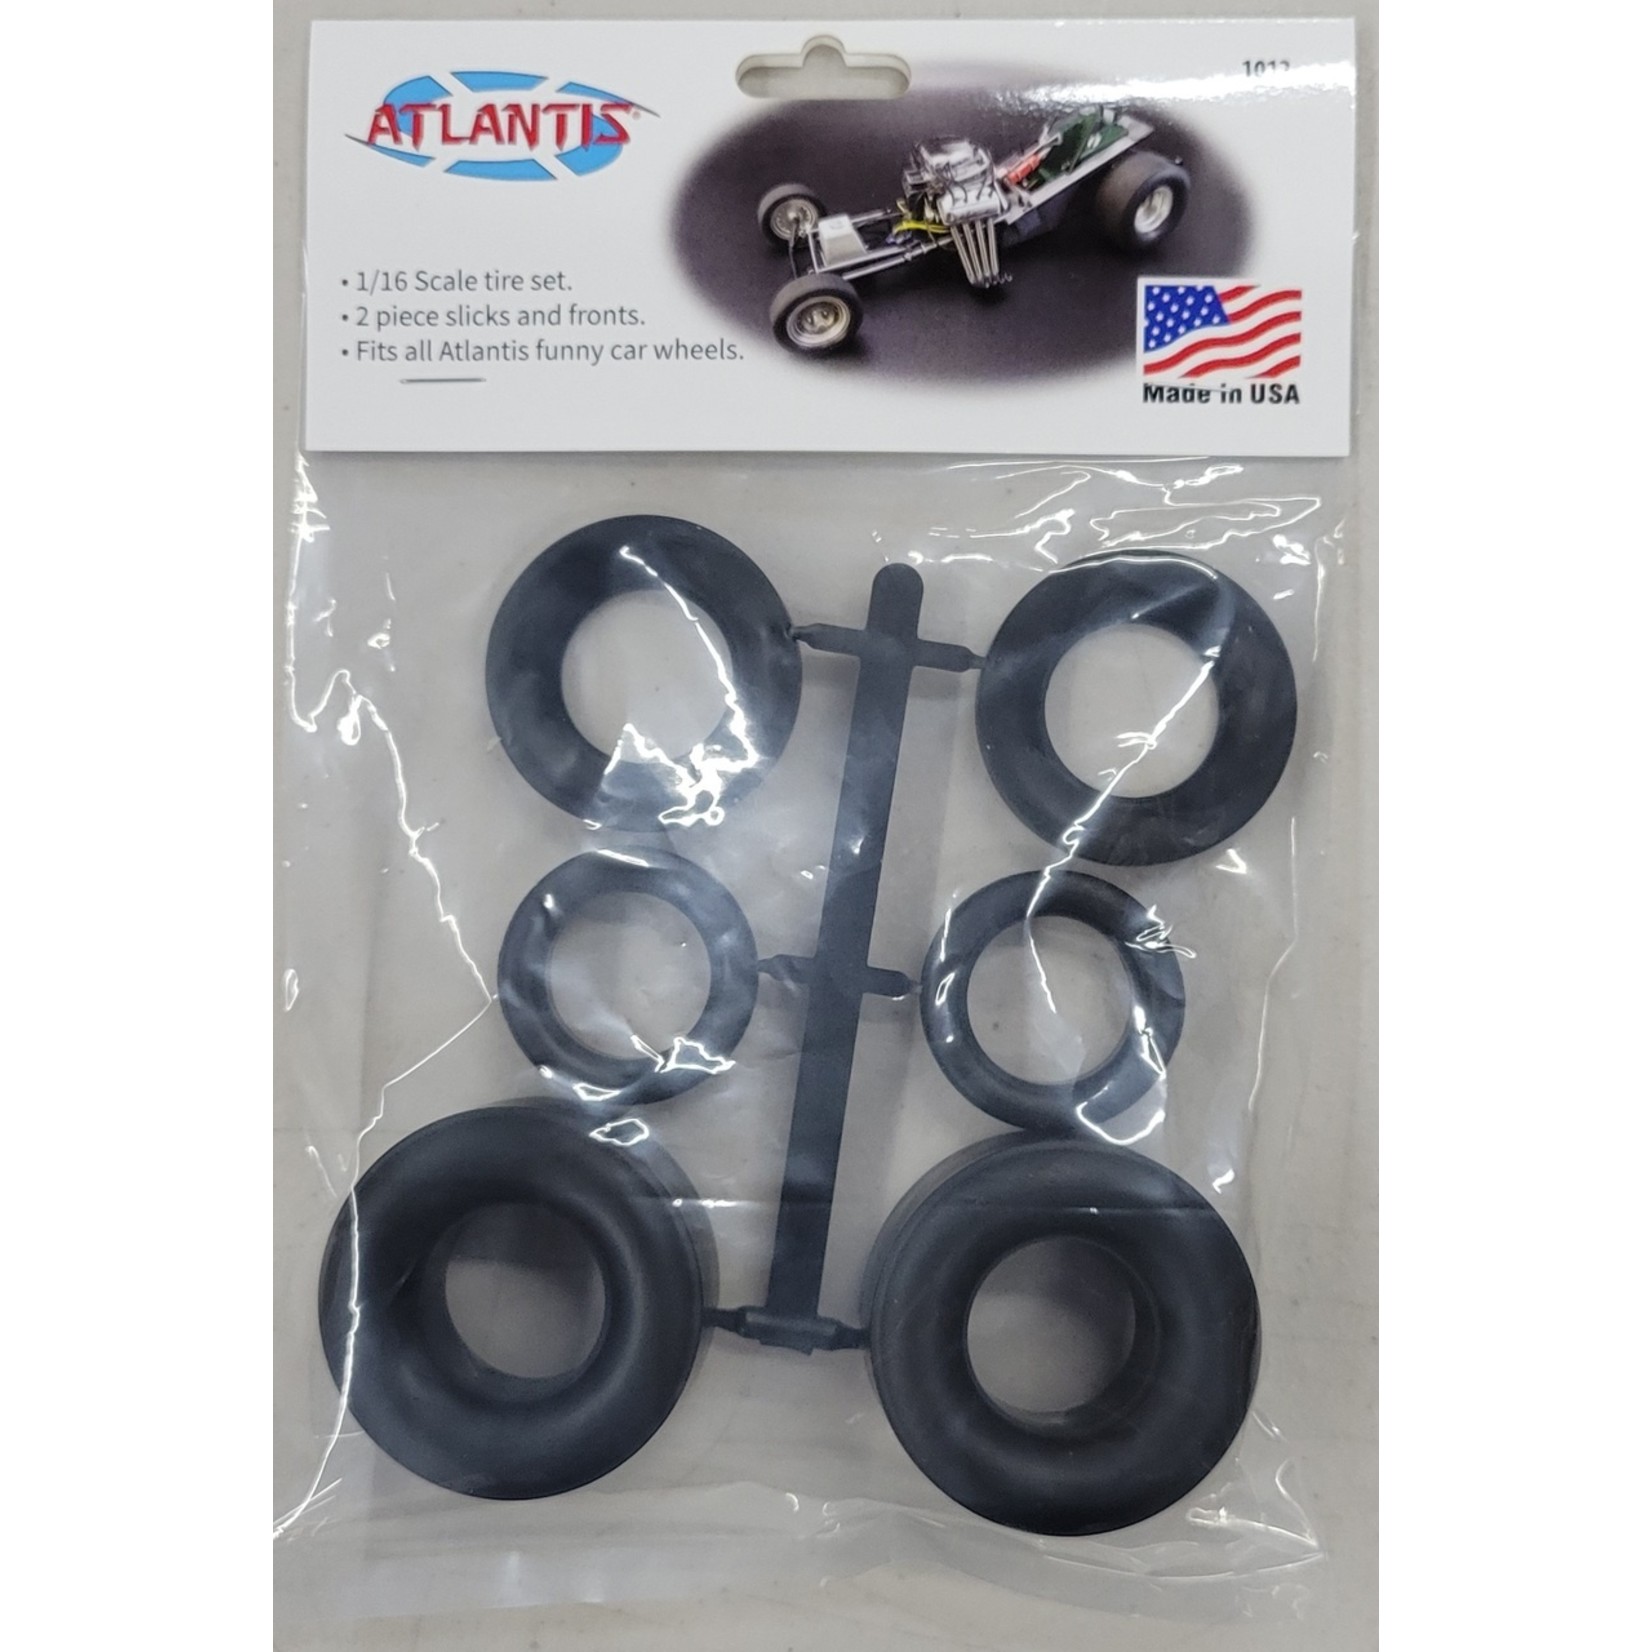 Atlantis Models AAN1012 - 1/16 Funny Car Tire set bagged with punched header card